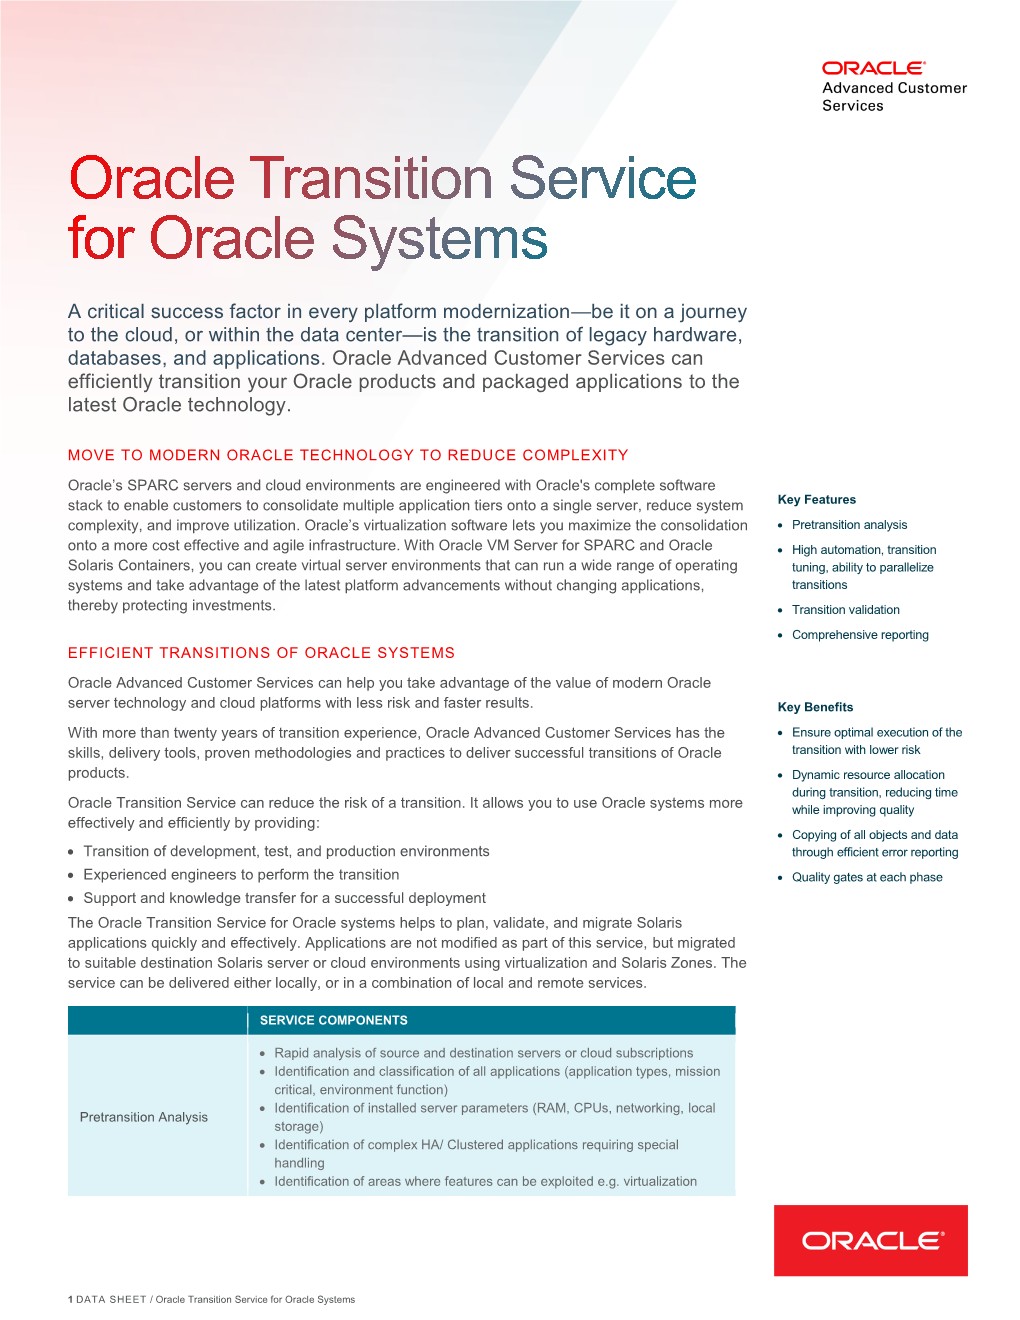 Oracle Transition Service for Systems